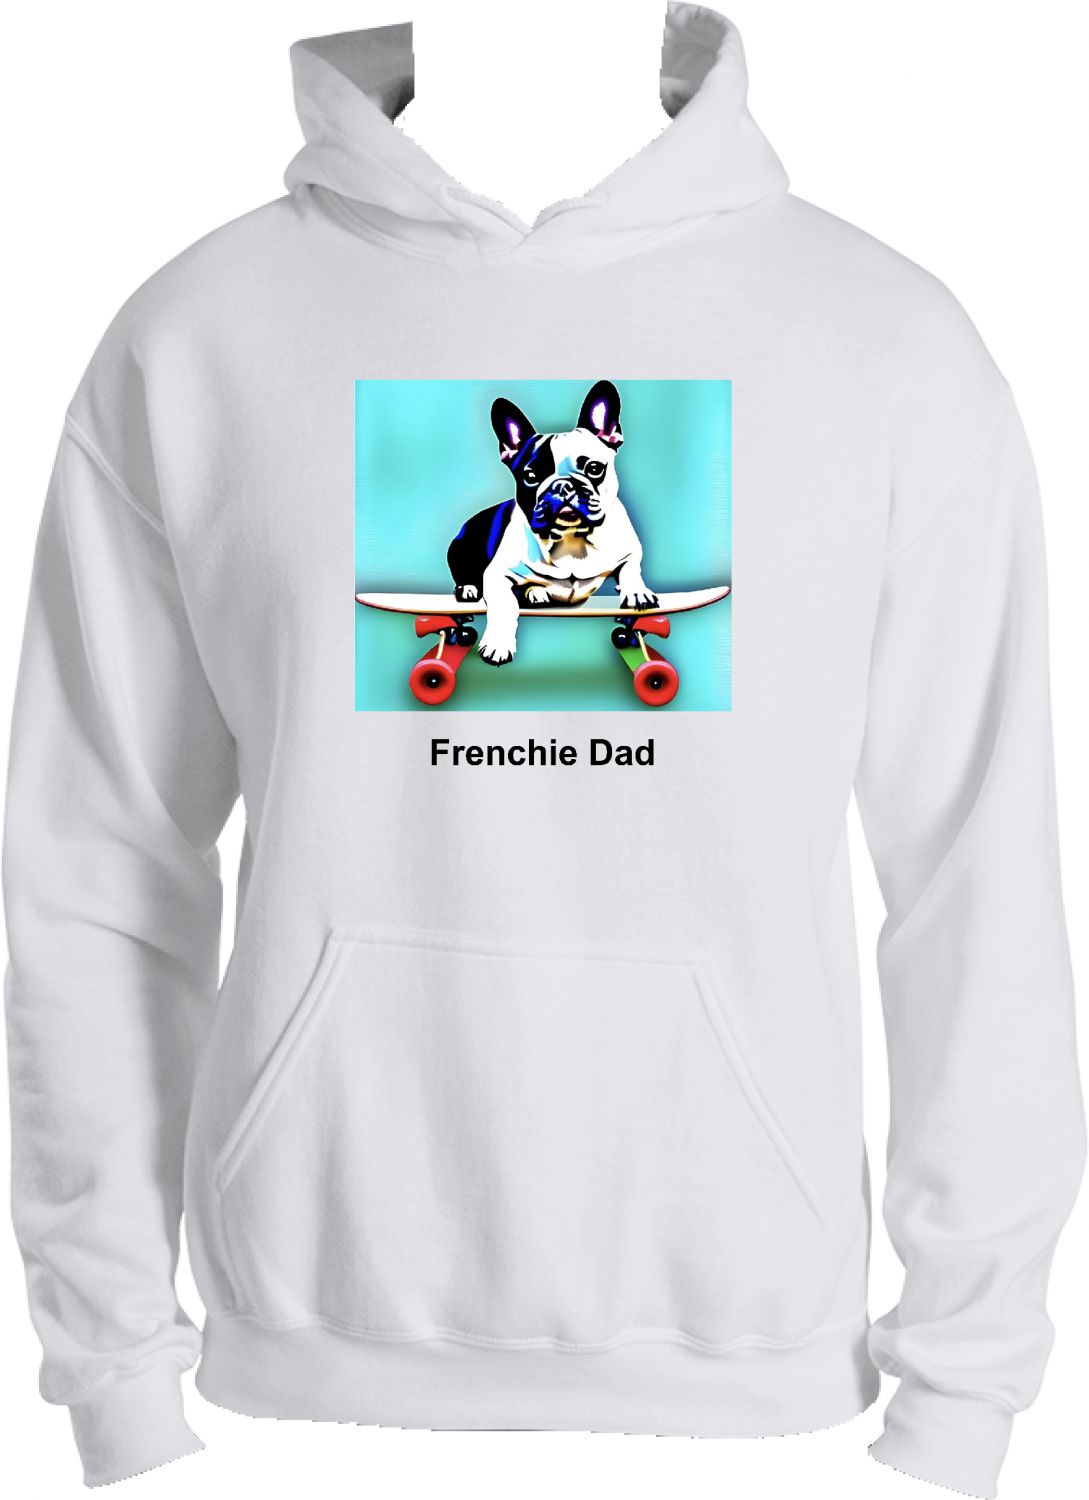 Frenchie on a Skateboard/Frenchie Dad